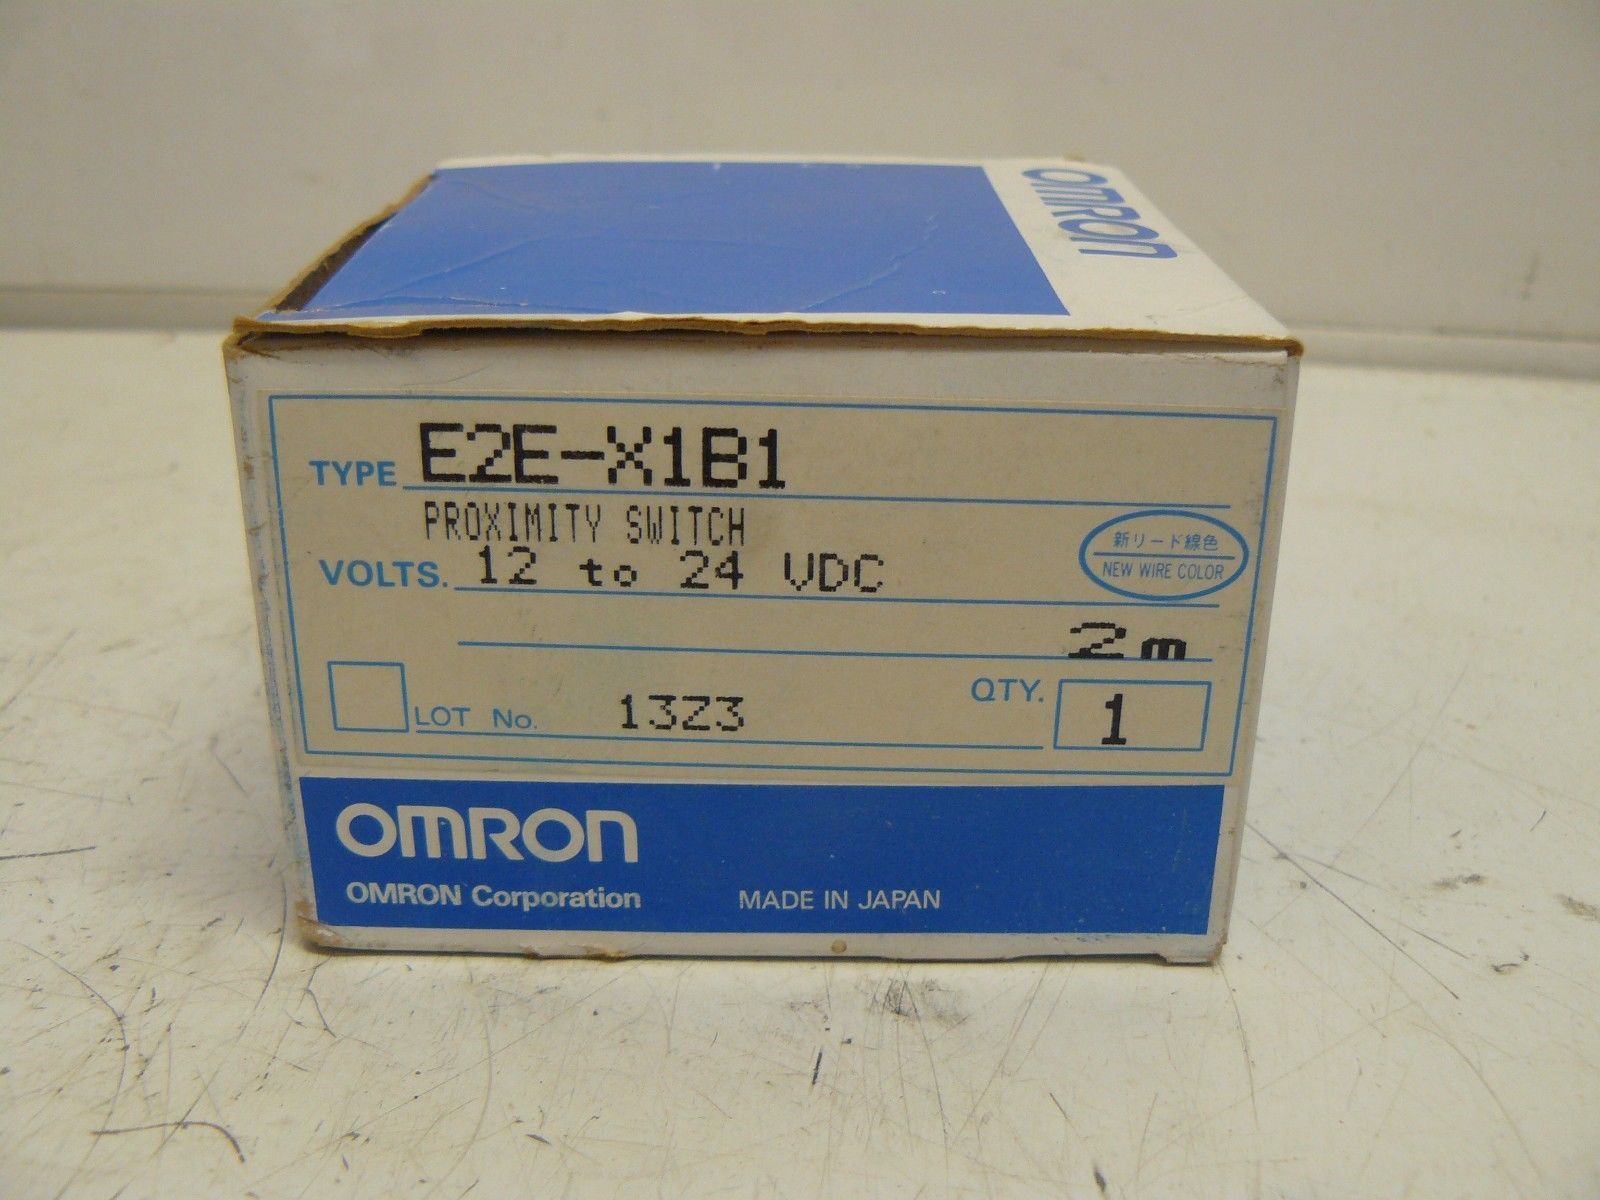 E2E-X1B1 KOEED 1, 80%, import_2020_10_10_031751, Omron, Other